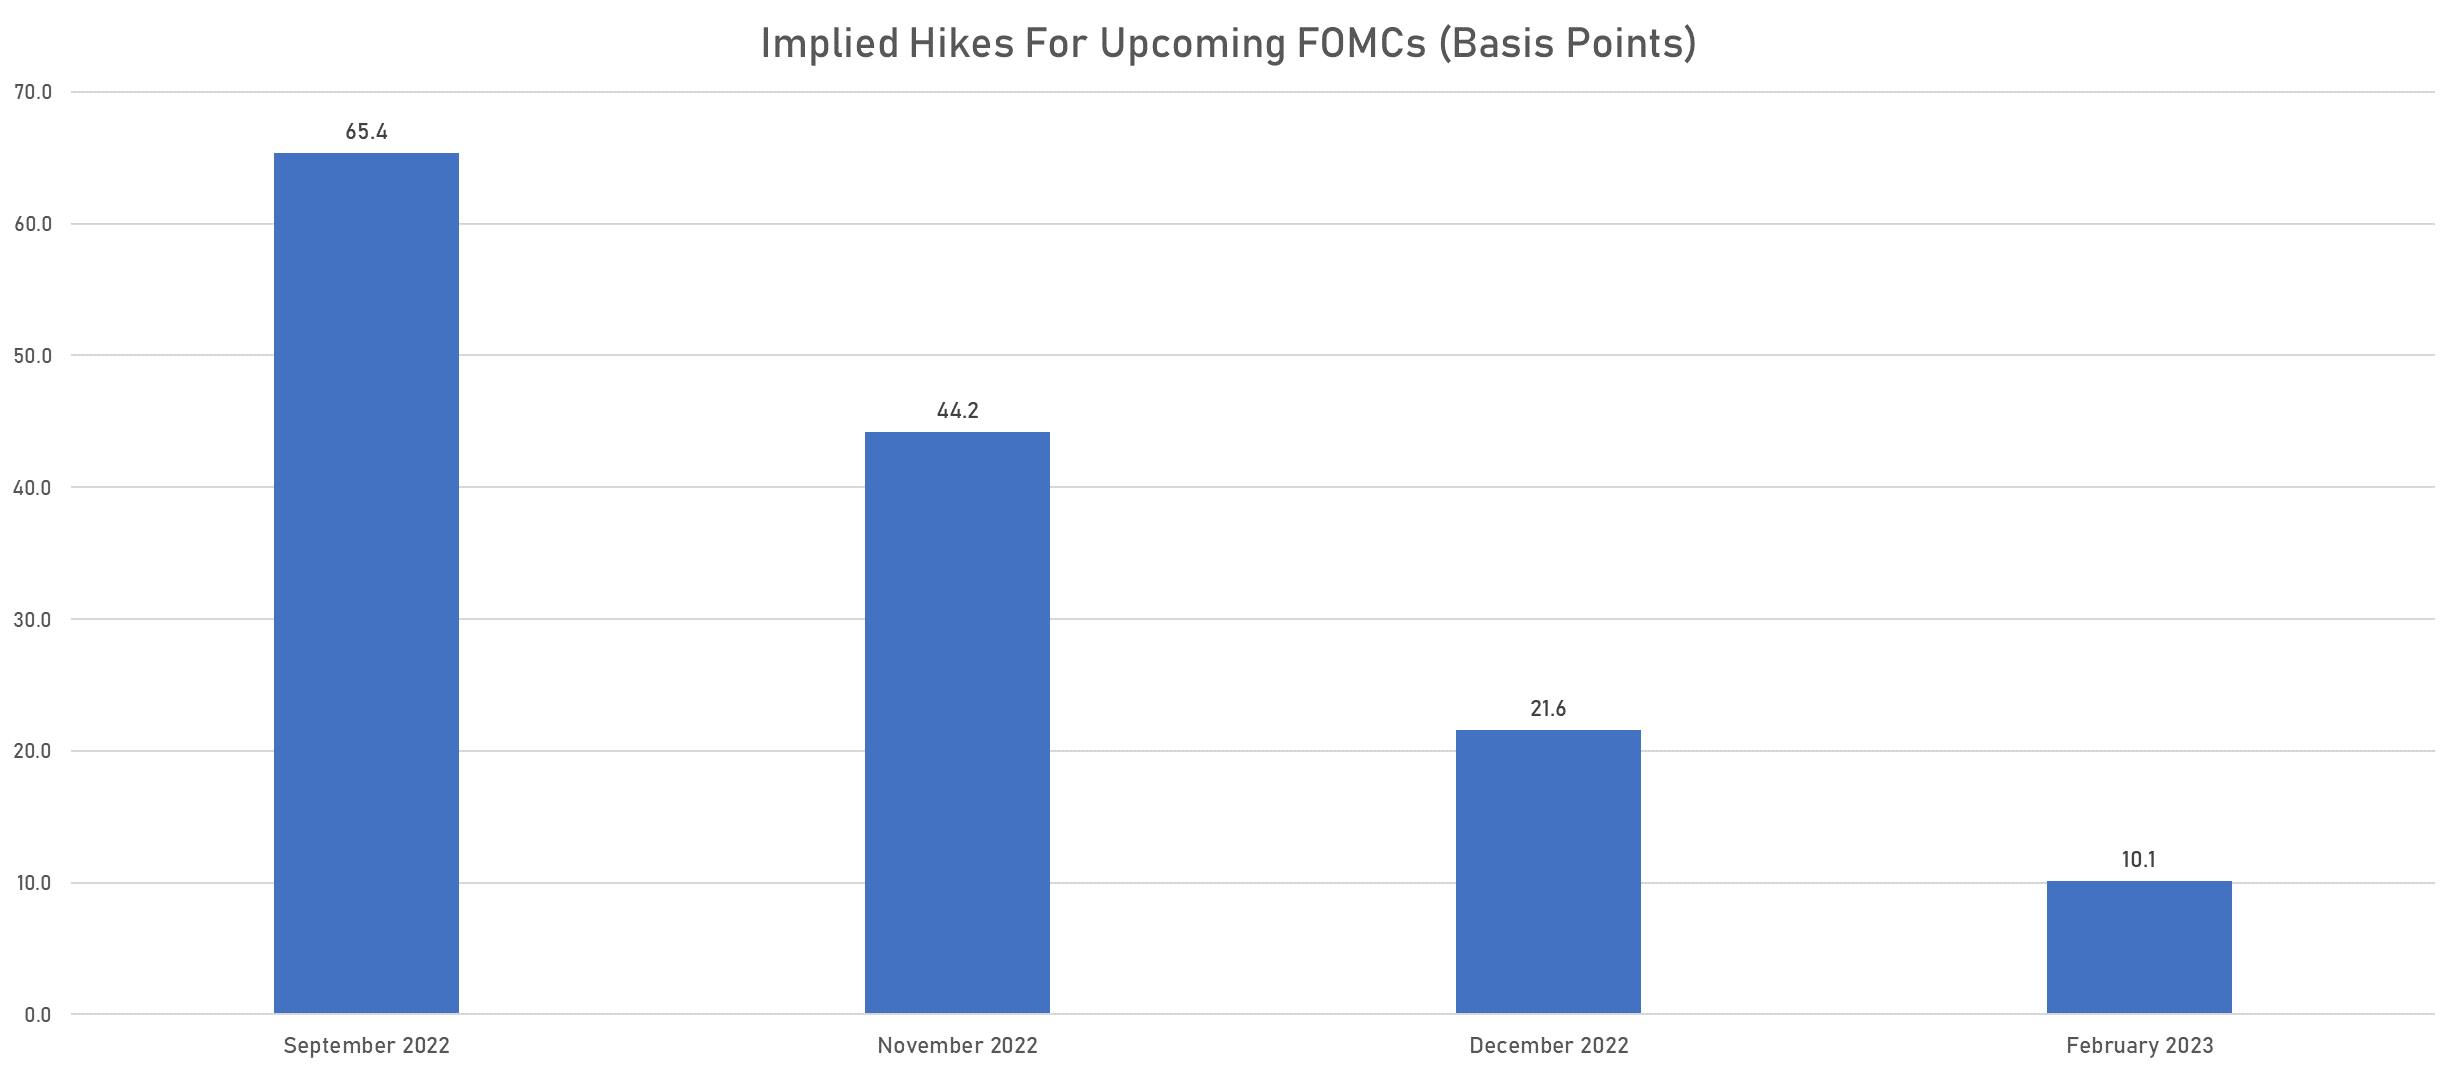 Hikes priced into Fed Funds futures | Sources: phipost.com, Refinitiv data